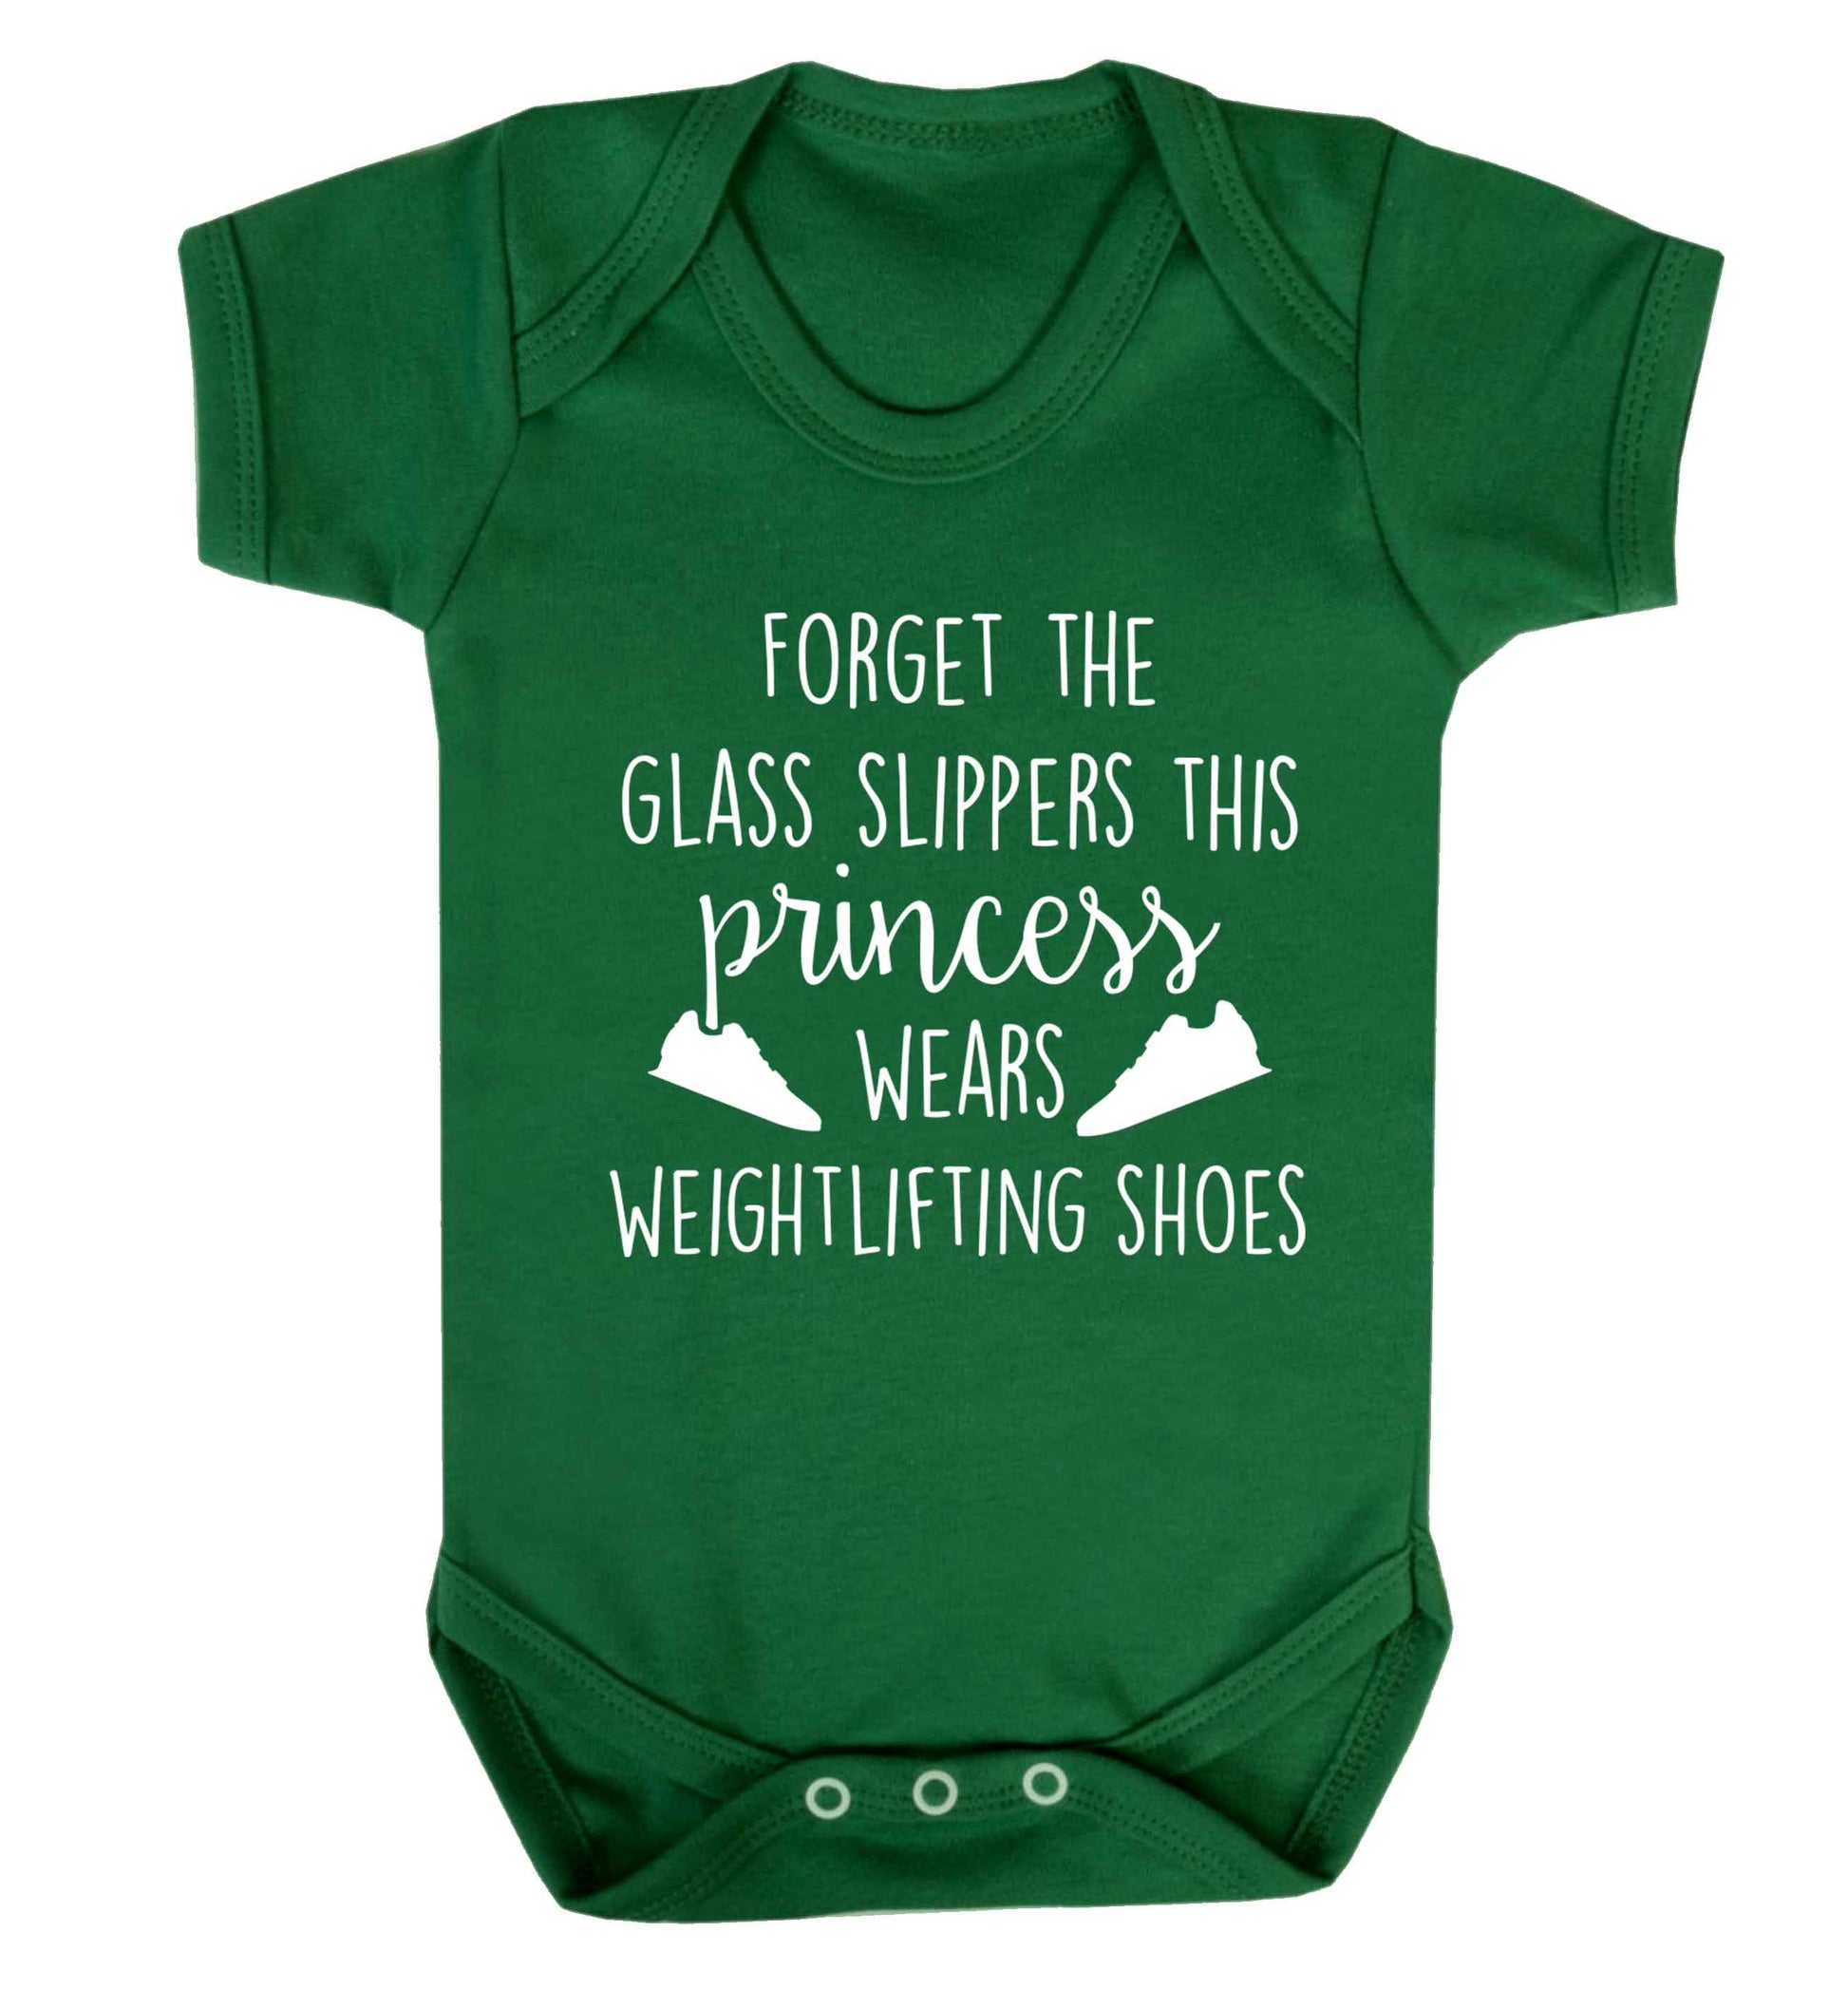 Forget the glass slippers this princess wears weightlifting shoes Baby Vest green 18-24 months